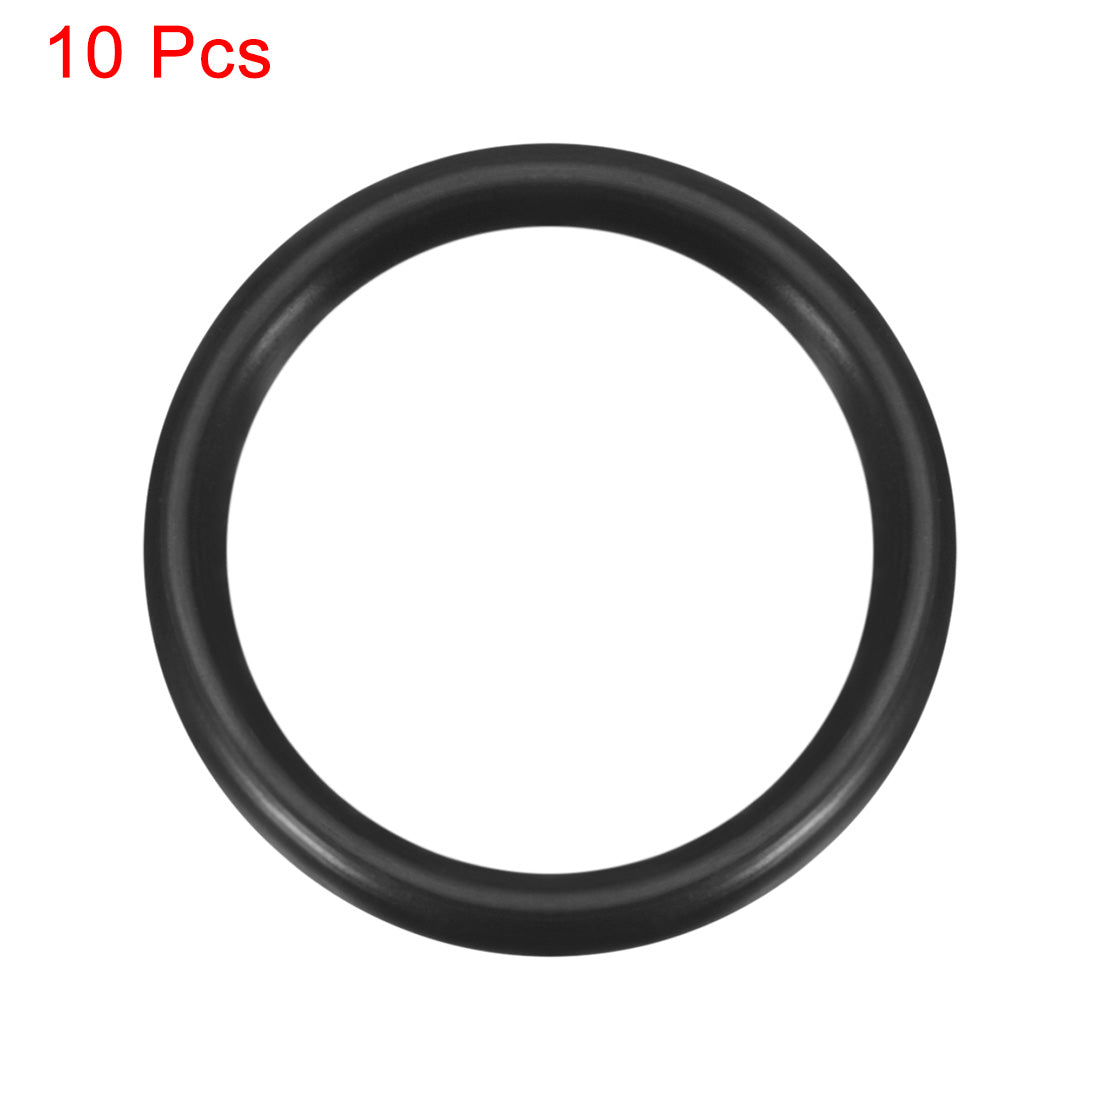 uxcell Uxcell O-Rings Nitrile Rubber 20mm x 25.3mm x 2.65mm Seal Rings Sealing Gasket 10pcs